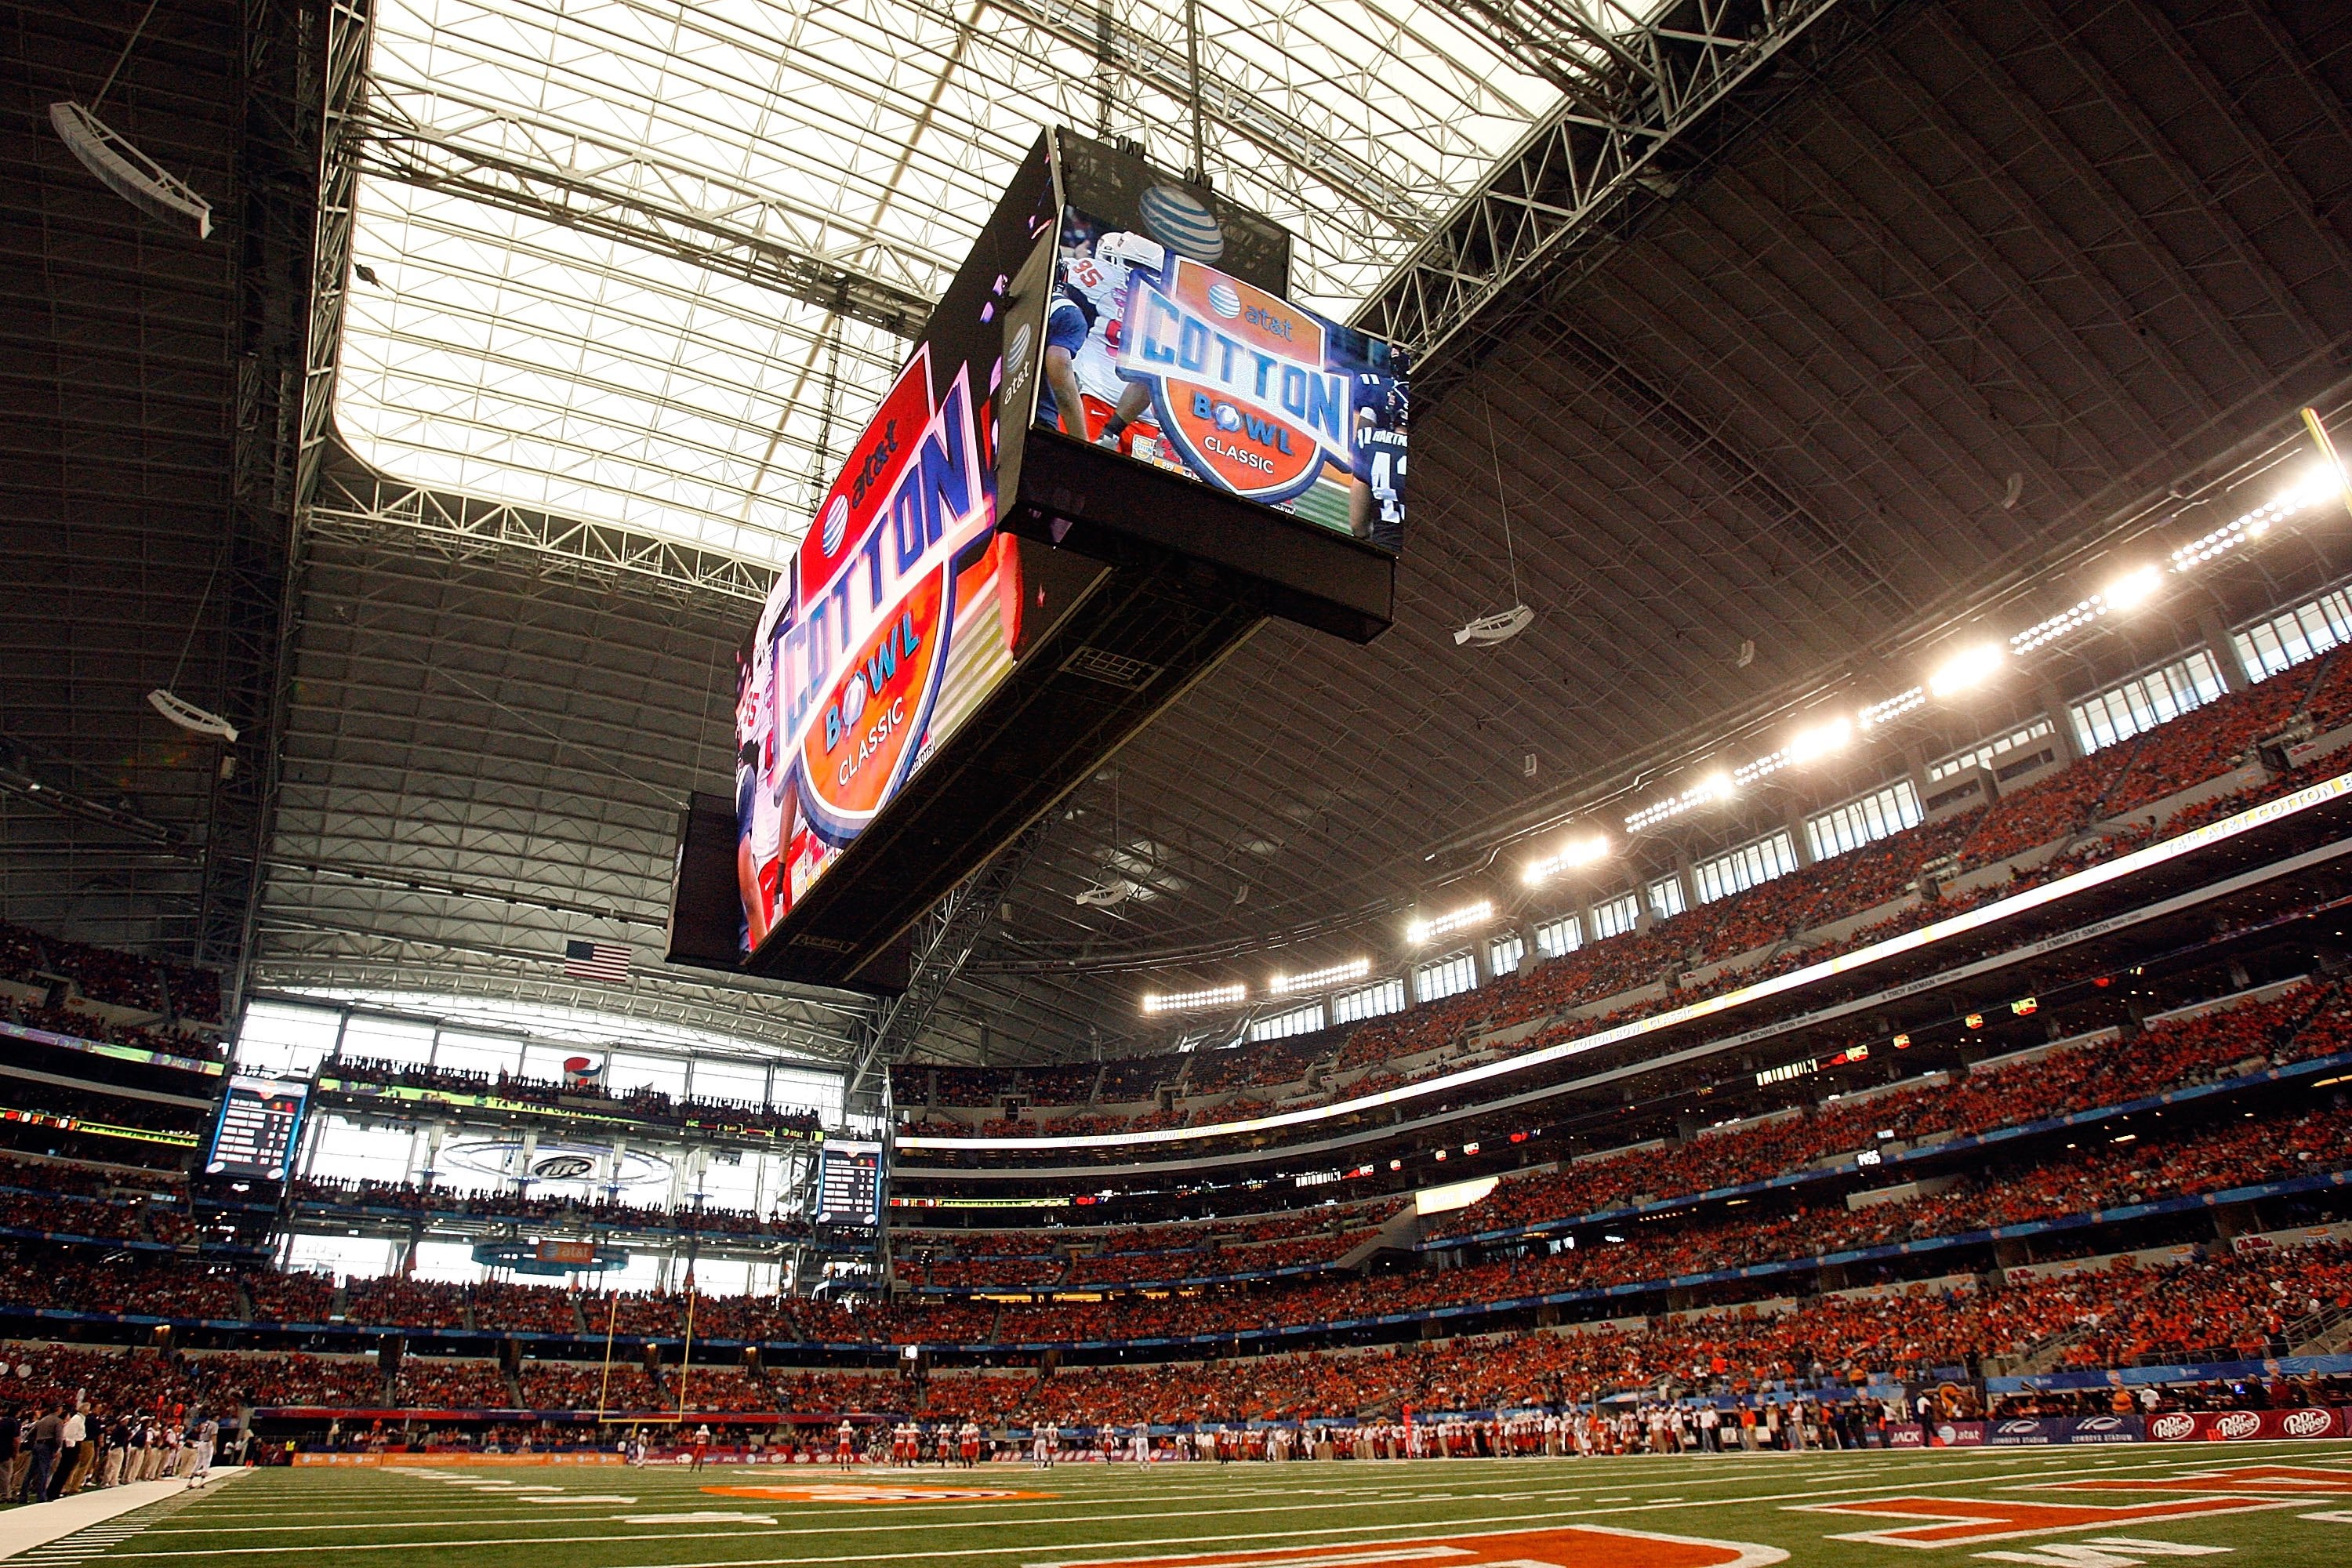 The AT&T Stadium boasts giant high-definition screens and a retractable roof